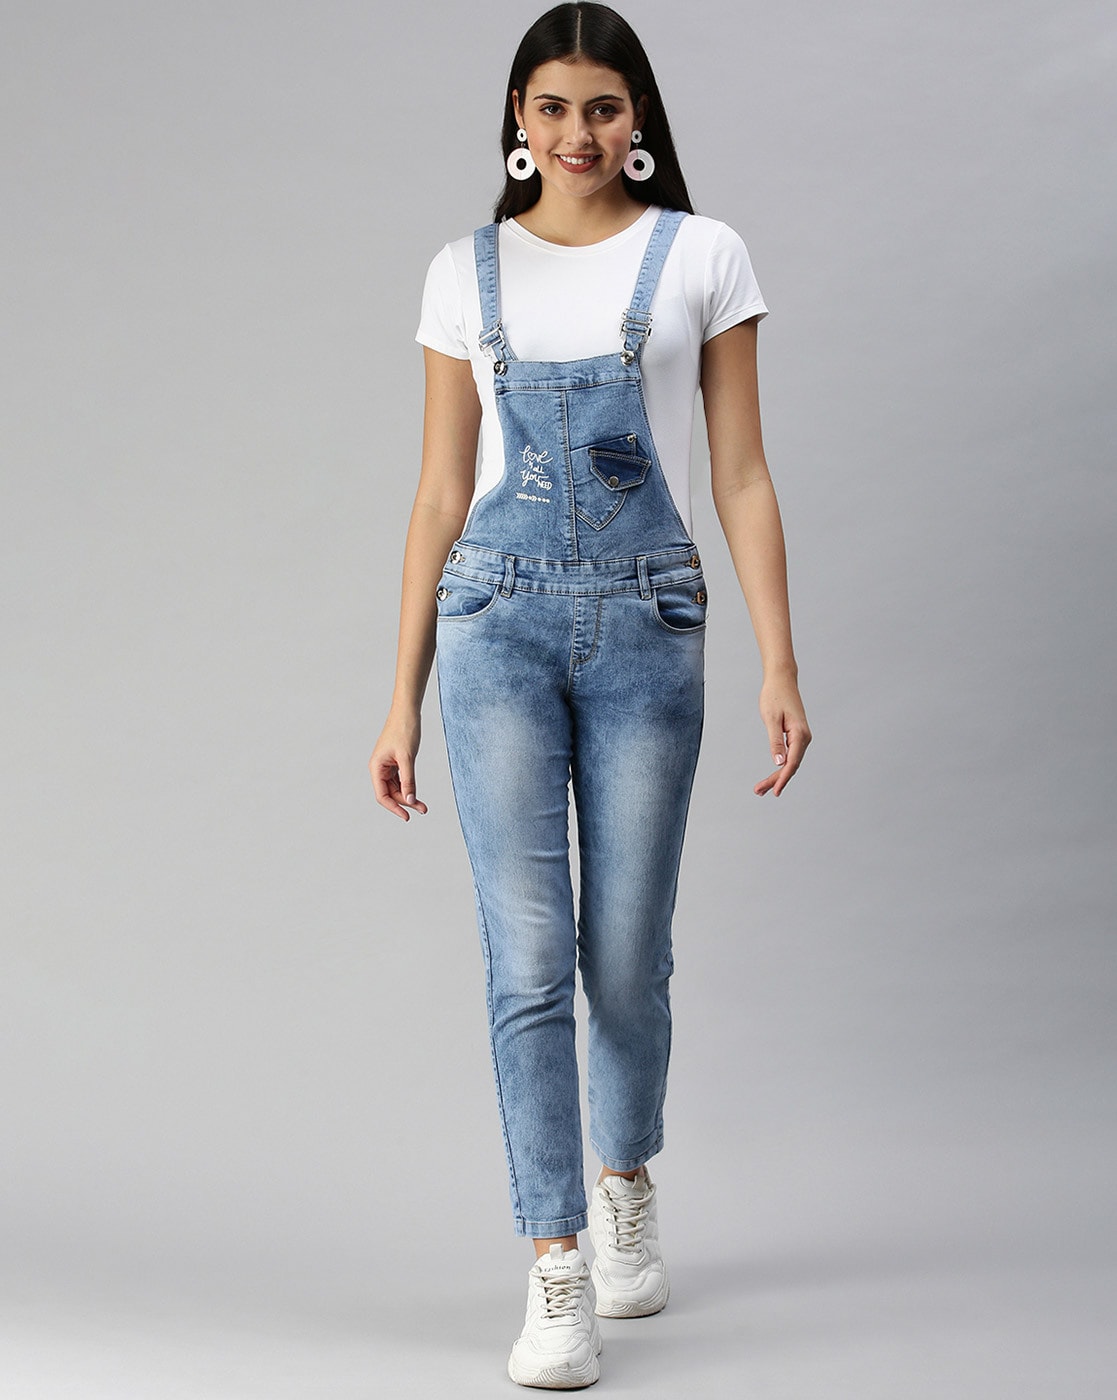 High-Quality Black Jean Overalls Baggy Straight Legs Overalls for Women in  Black S M | Black overalls outfit, Black denim overalls, Black overalls